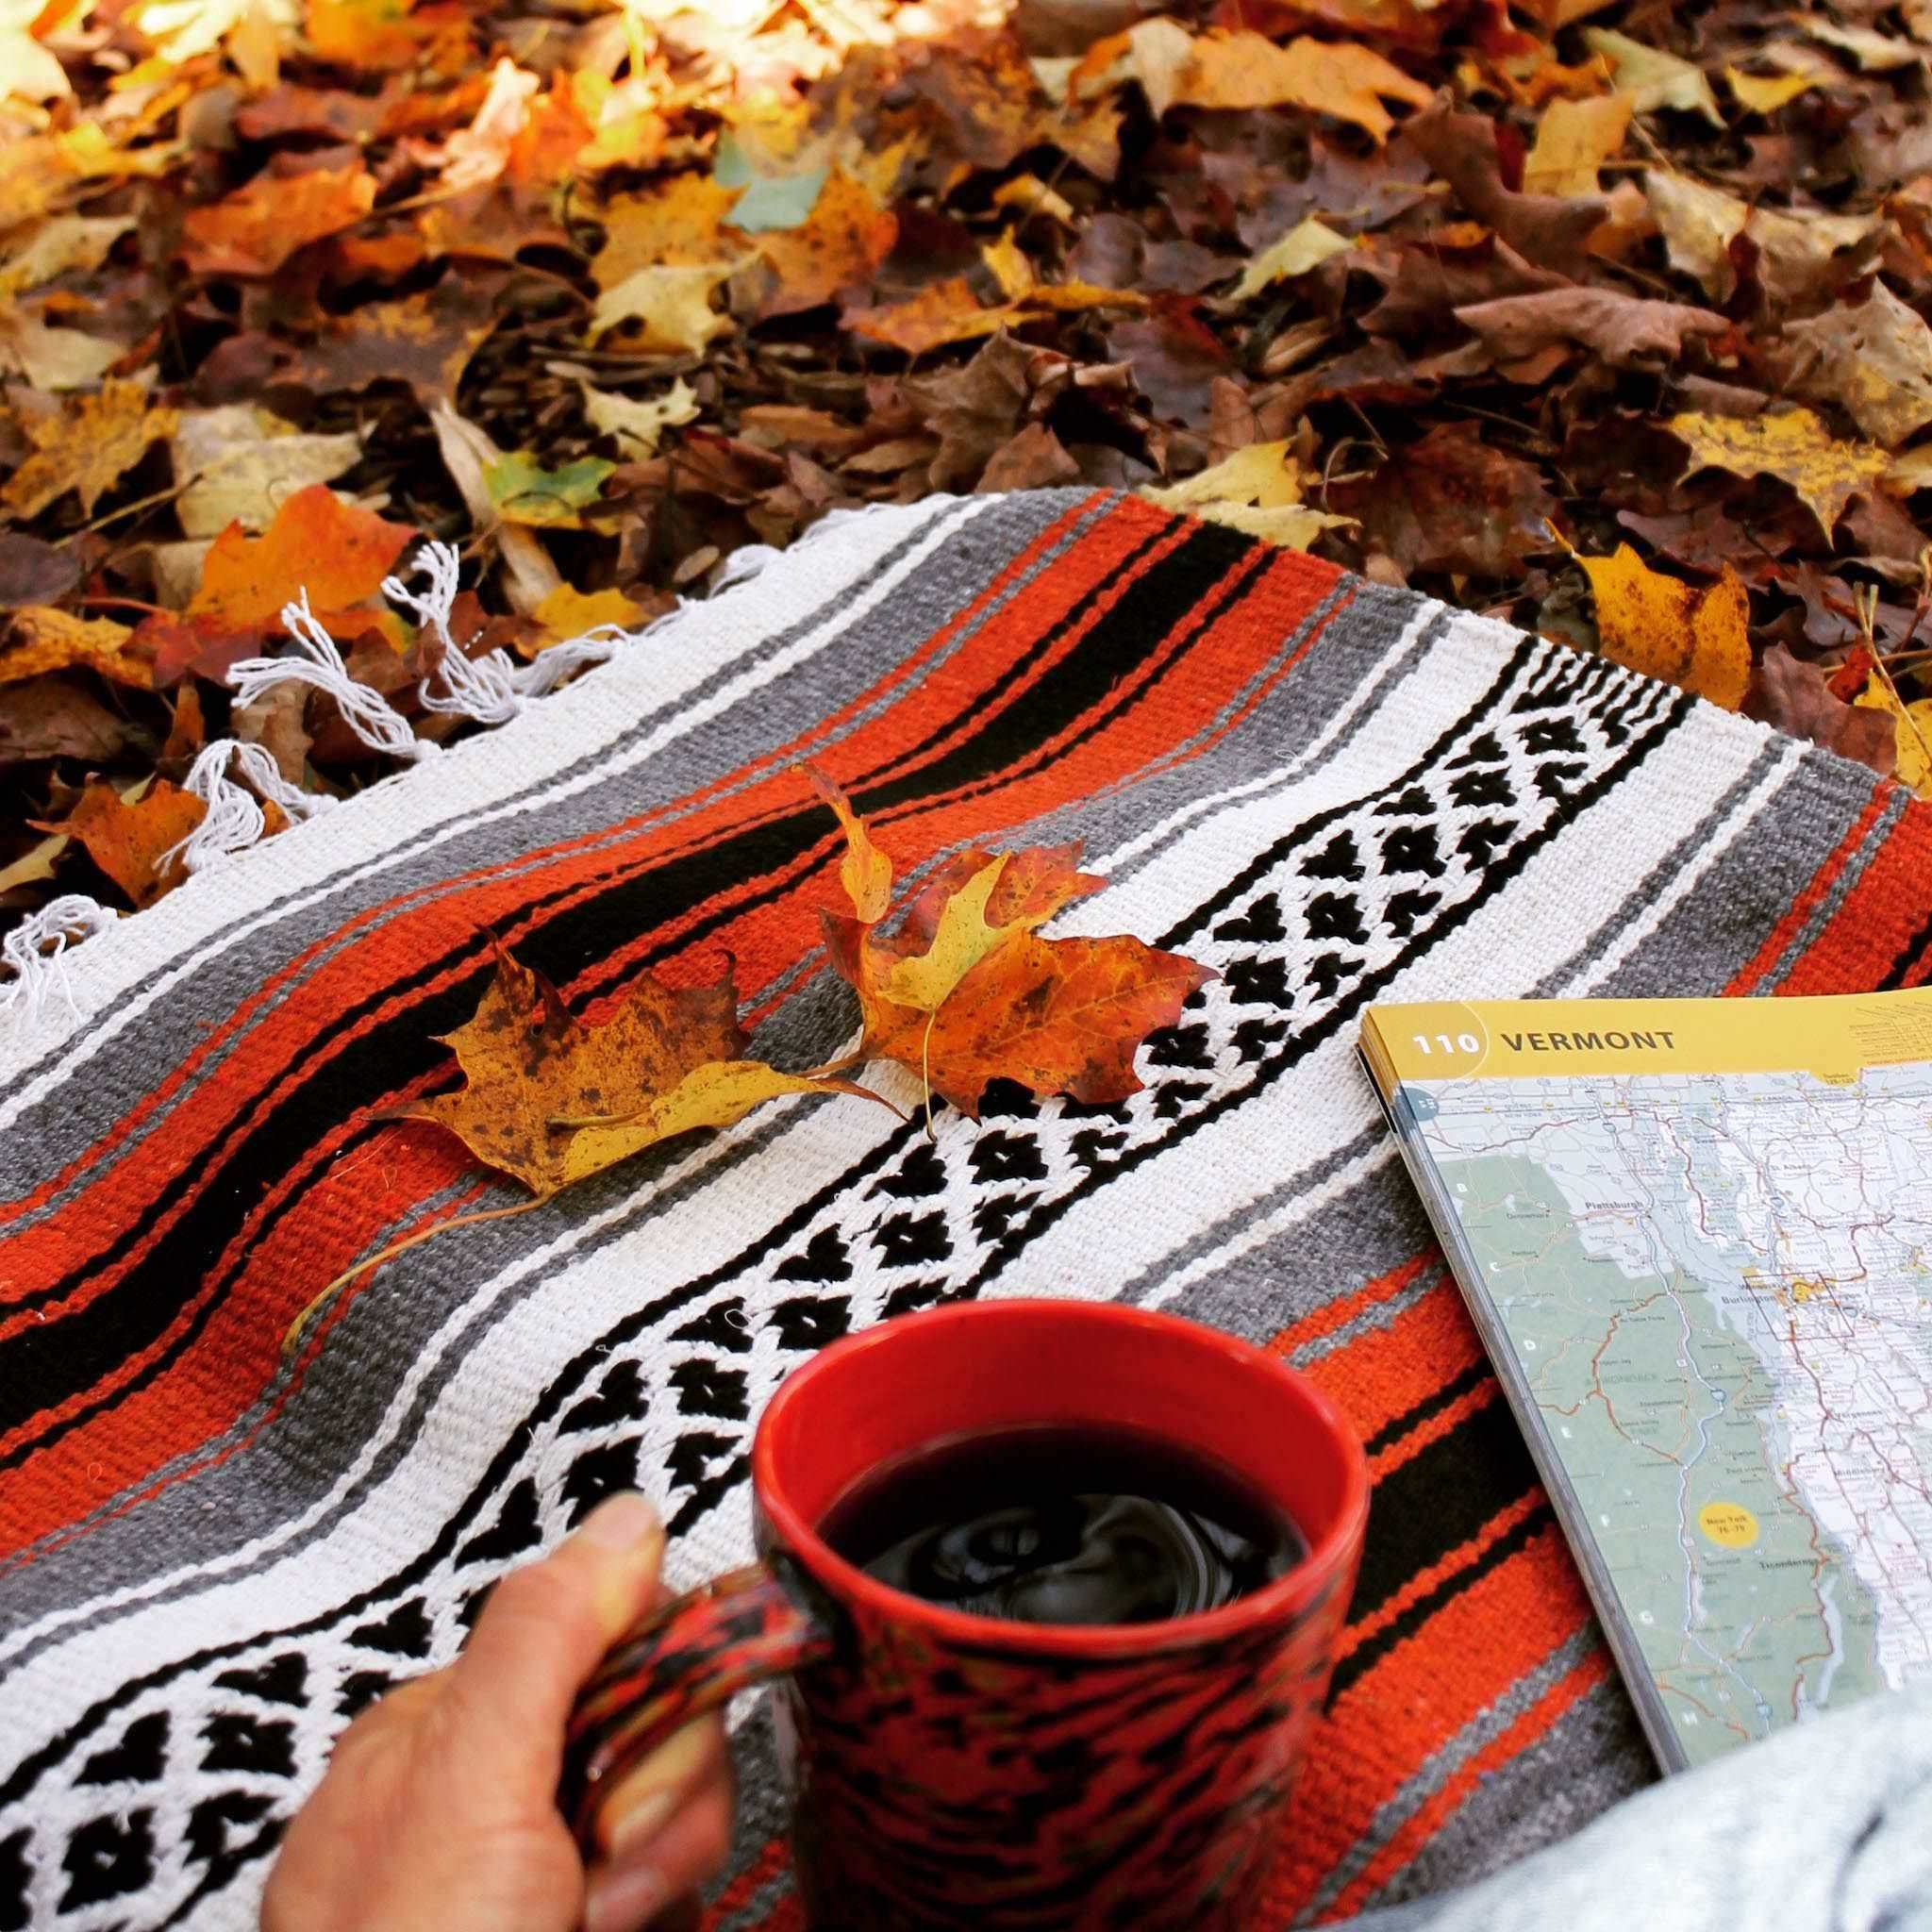 Corner of blanket woven with alternating solid stripes in white, black, grey and rusty orange, and white stripe with pattern of small black diamonds, and white fringed edge, lying on ground covered with yellow and brown fallen leaves, with hand holding an orange ceramic cup full of coffee and corner of map of Vermont resting on blanket.